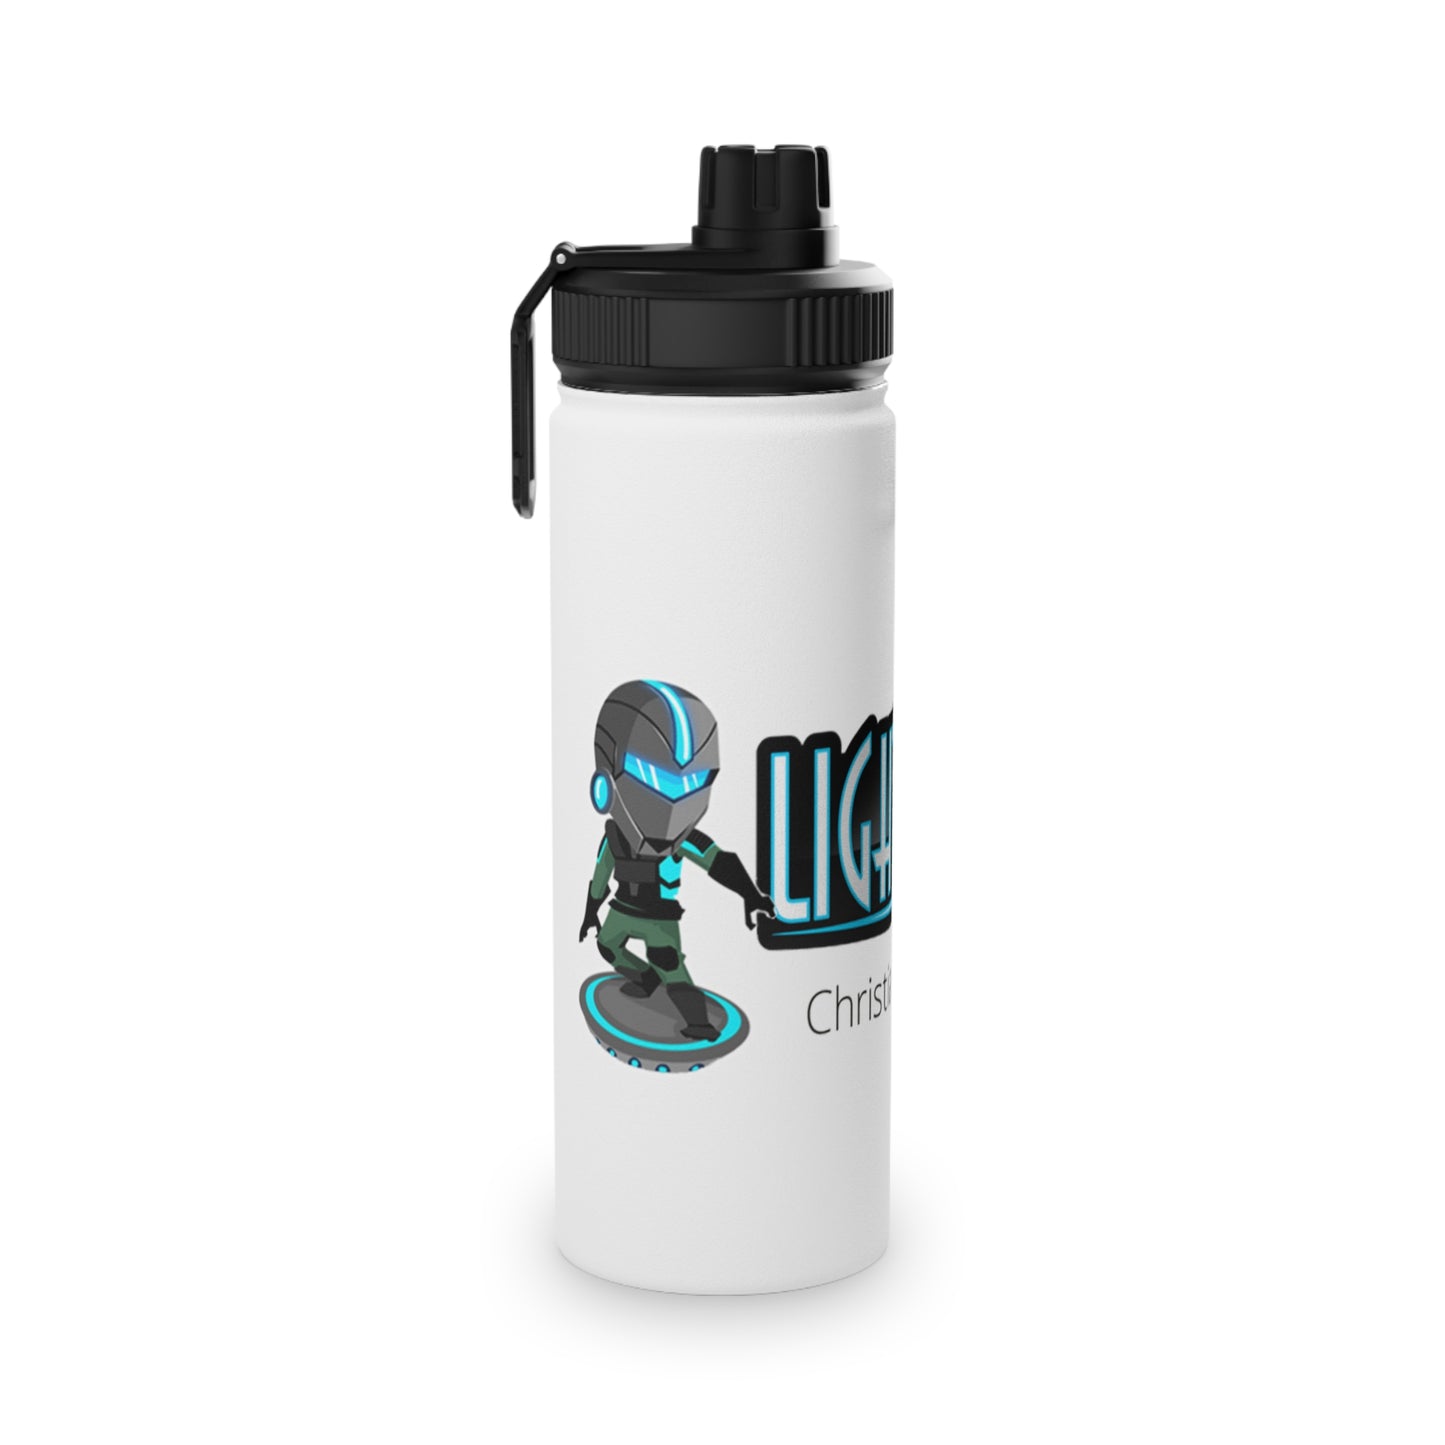 Water Bottle - Stainless Steal, Sports Lid